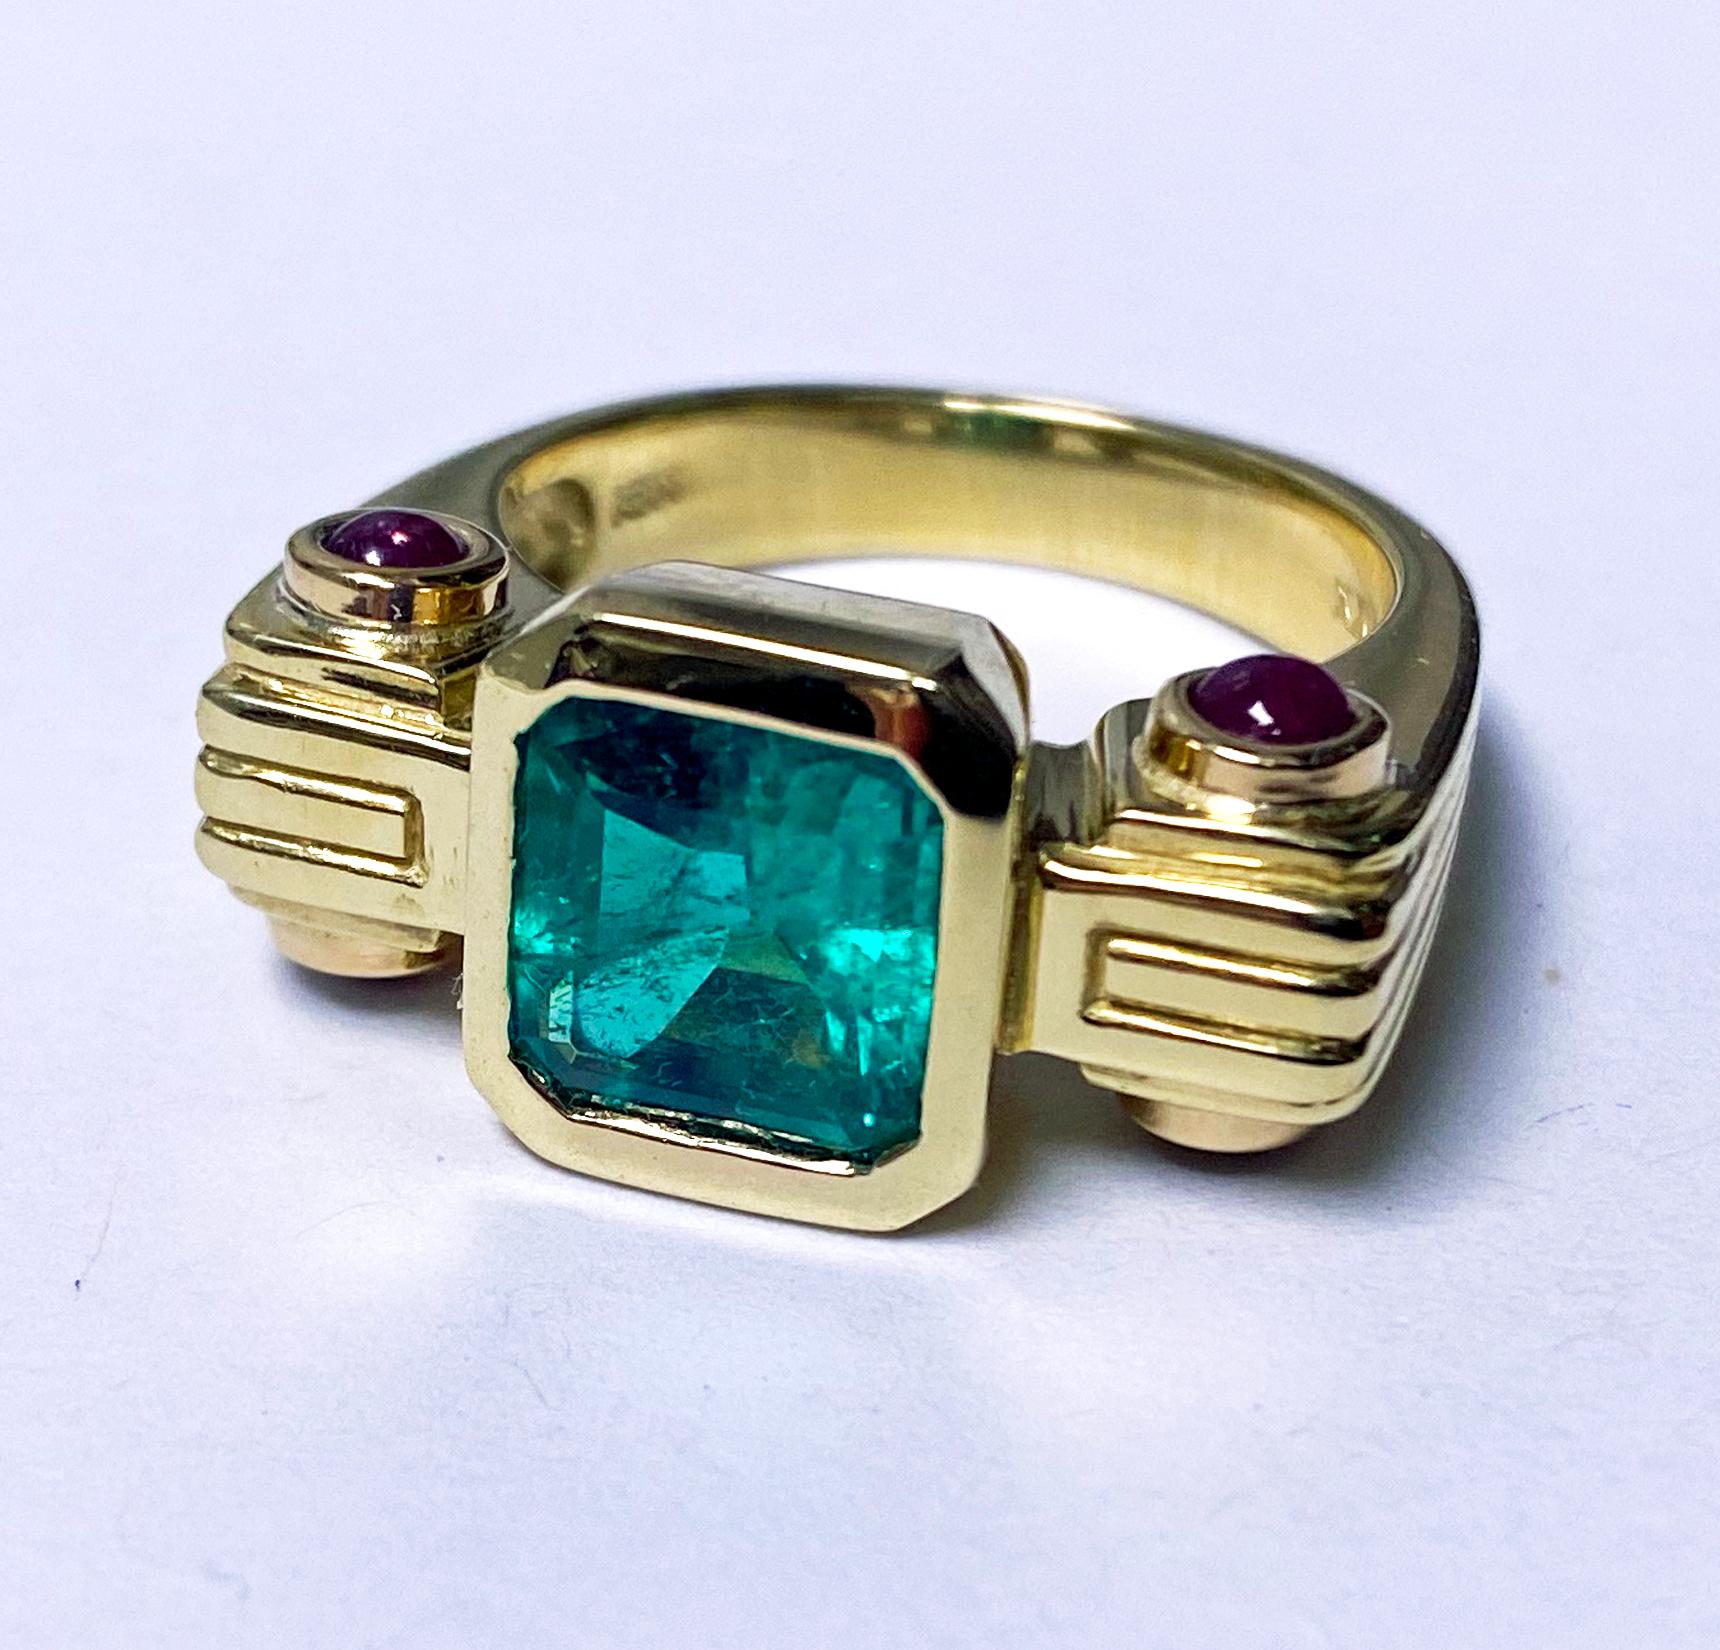 Emerald, Ruby and 18K Ring. Unisex custom made ribbed design, bezel set in the centre with an emerald cut natural  medium tone, strong Green Emerald, gauging 9.18 x 8.78 x 5.11mm, estimated weight calculated by formula 3.02 cts, SI1 clarity (type